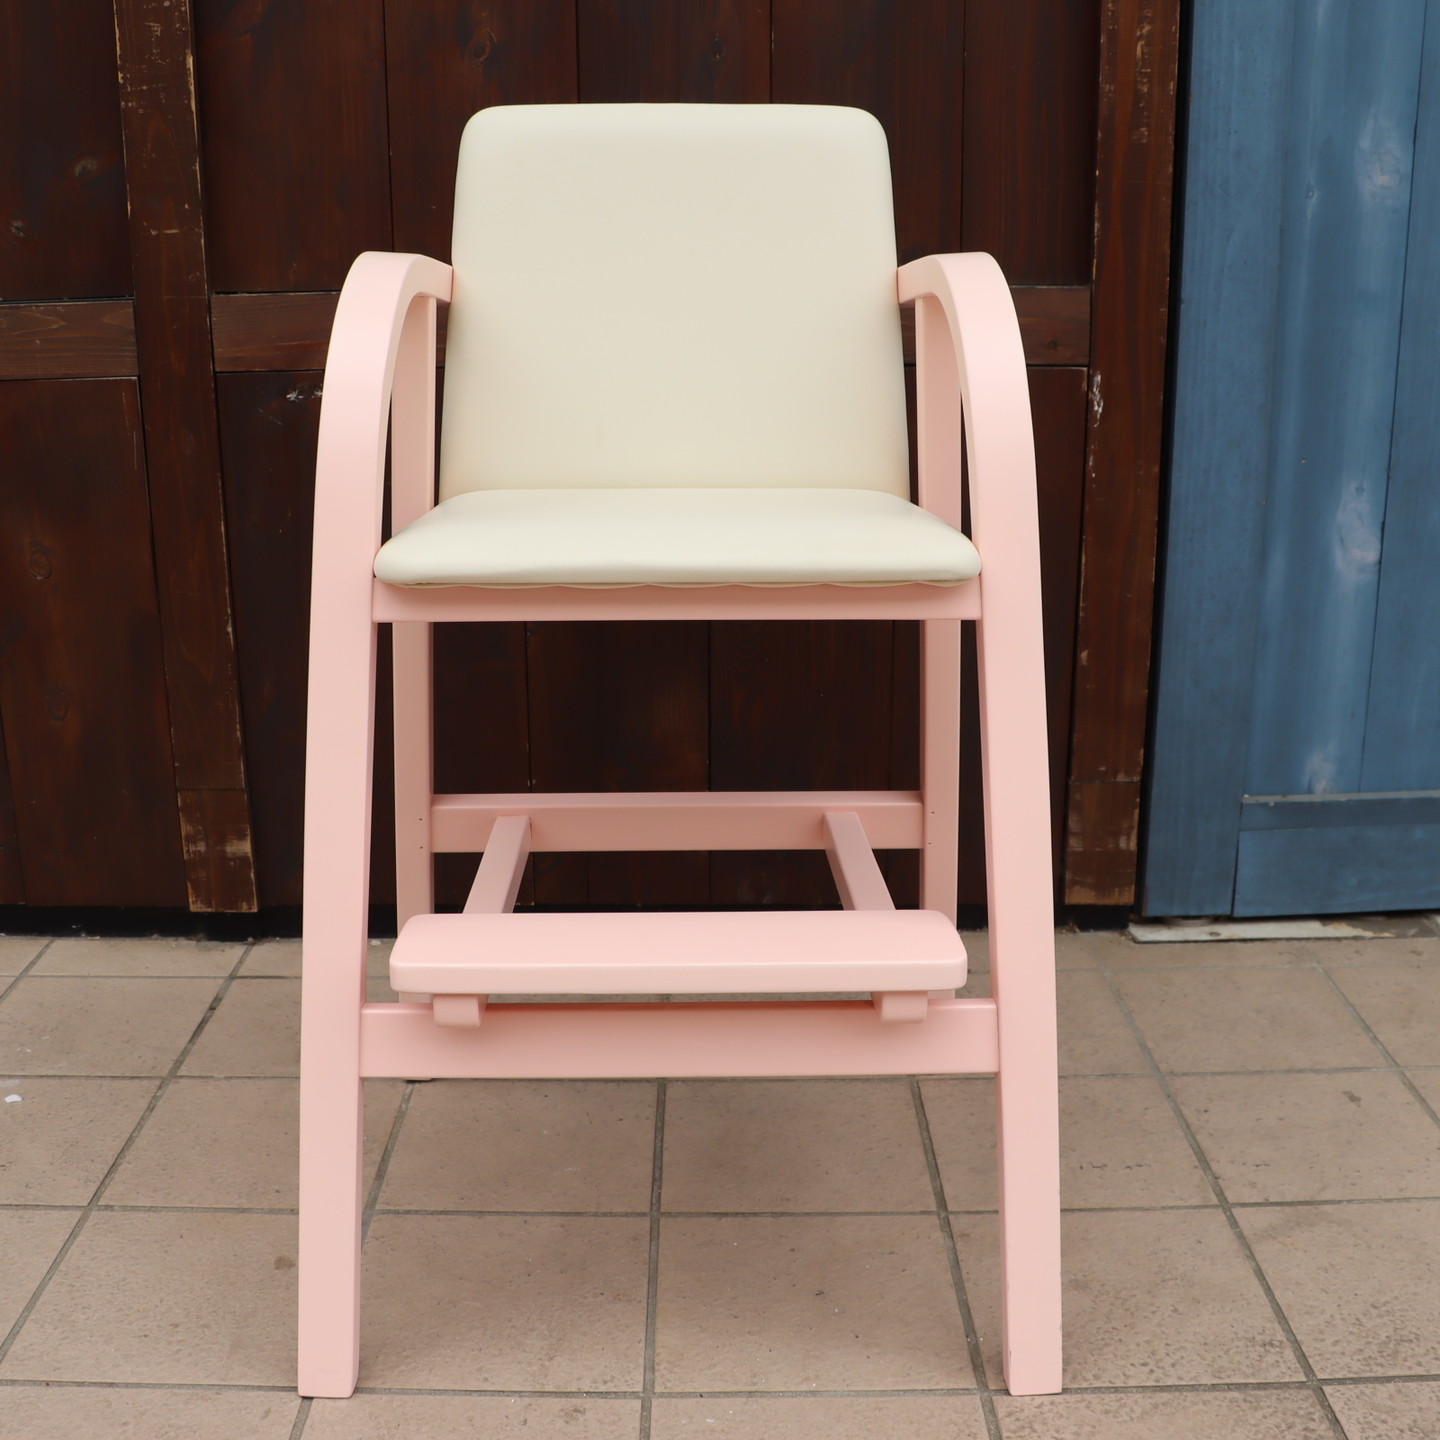 AKIMOKU Akita woodworking No.42 beech material baby chair pink high chair Kids chair IDC large . furniture Northern Europe style simple bending tree child chair DC426